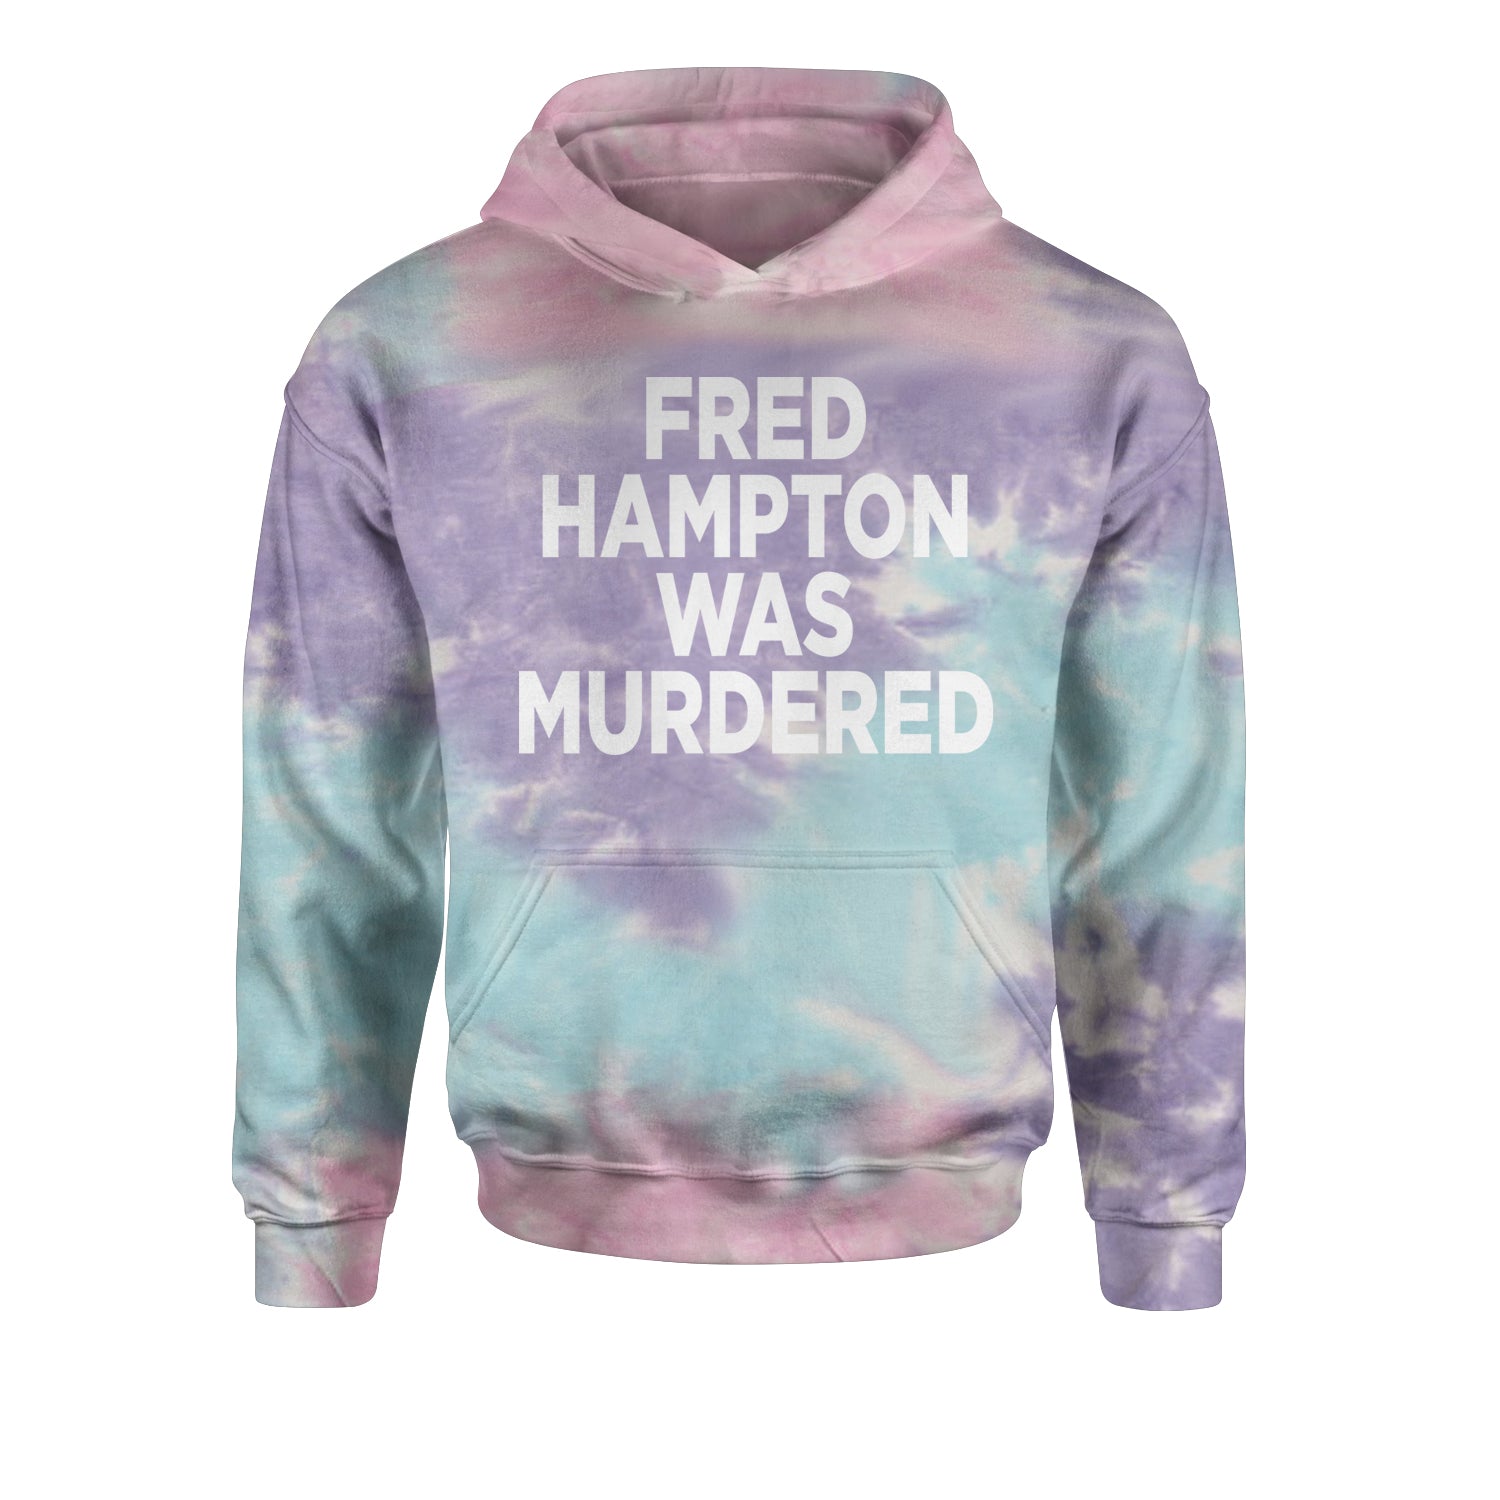 Fred Hampton Was Murdered Youth-Sized Hoodie activism, african, africanamerican, american, black, blm, brutality, eddie, lives, matter, murphy, people, police, you by Expression Tees